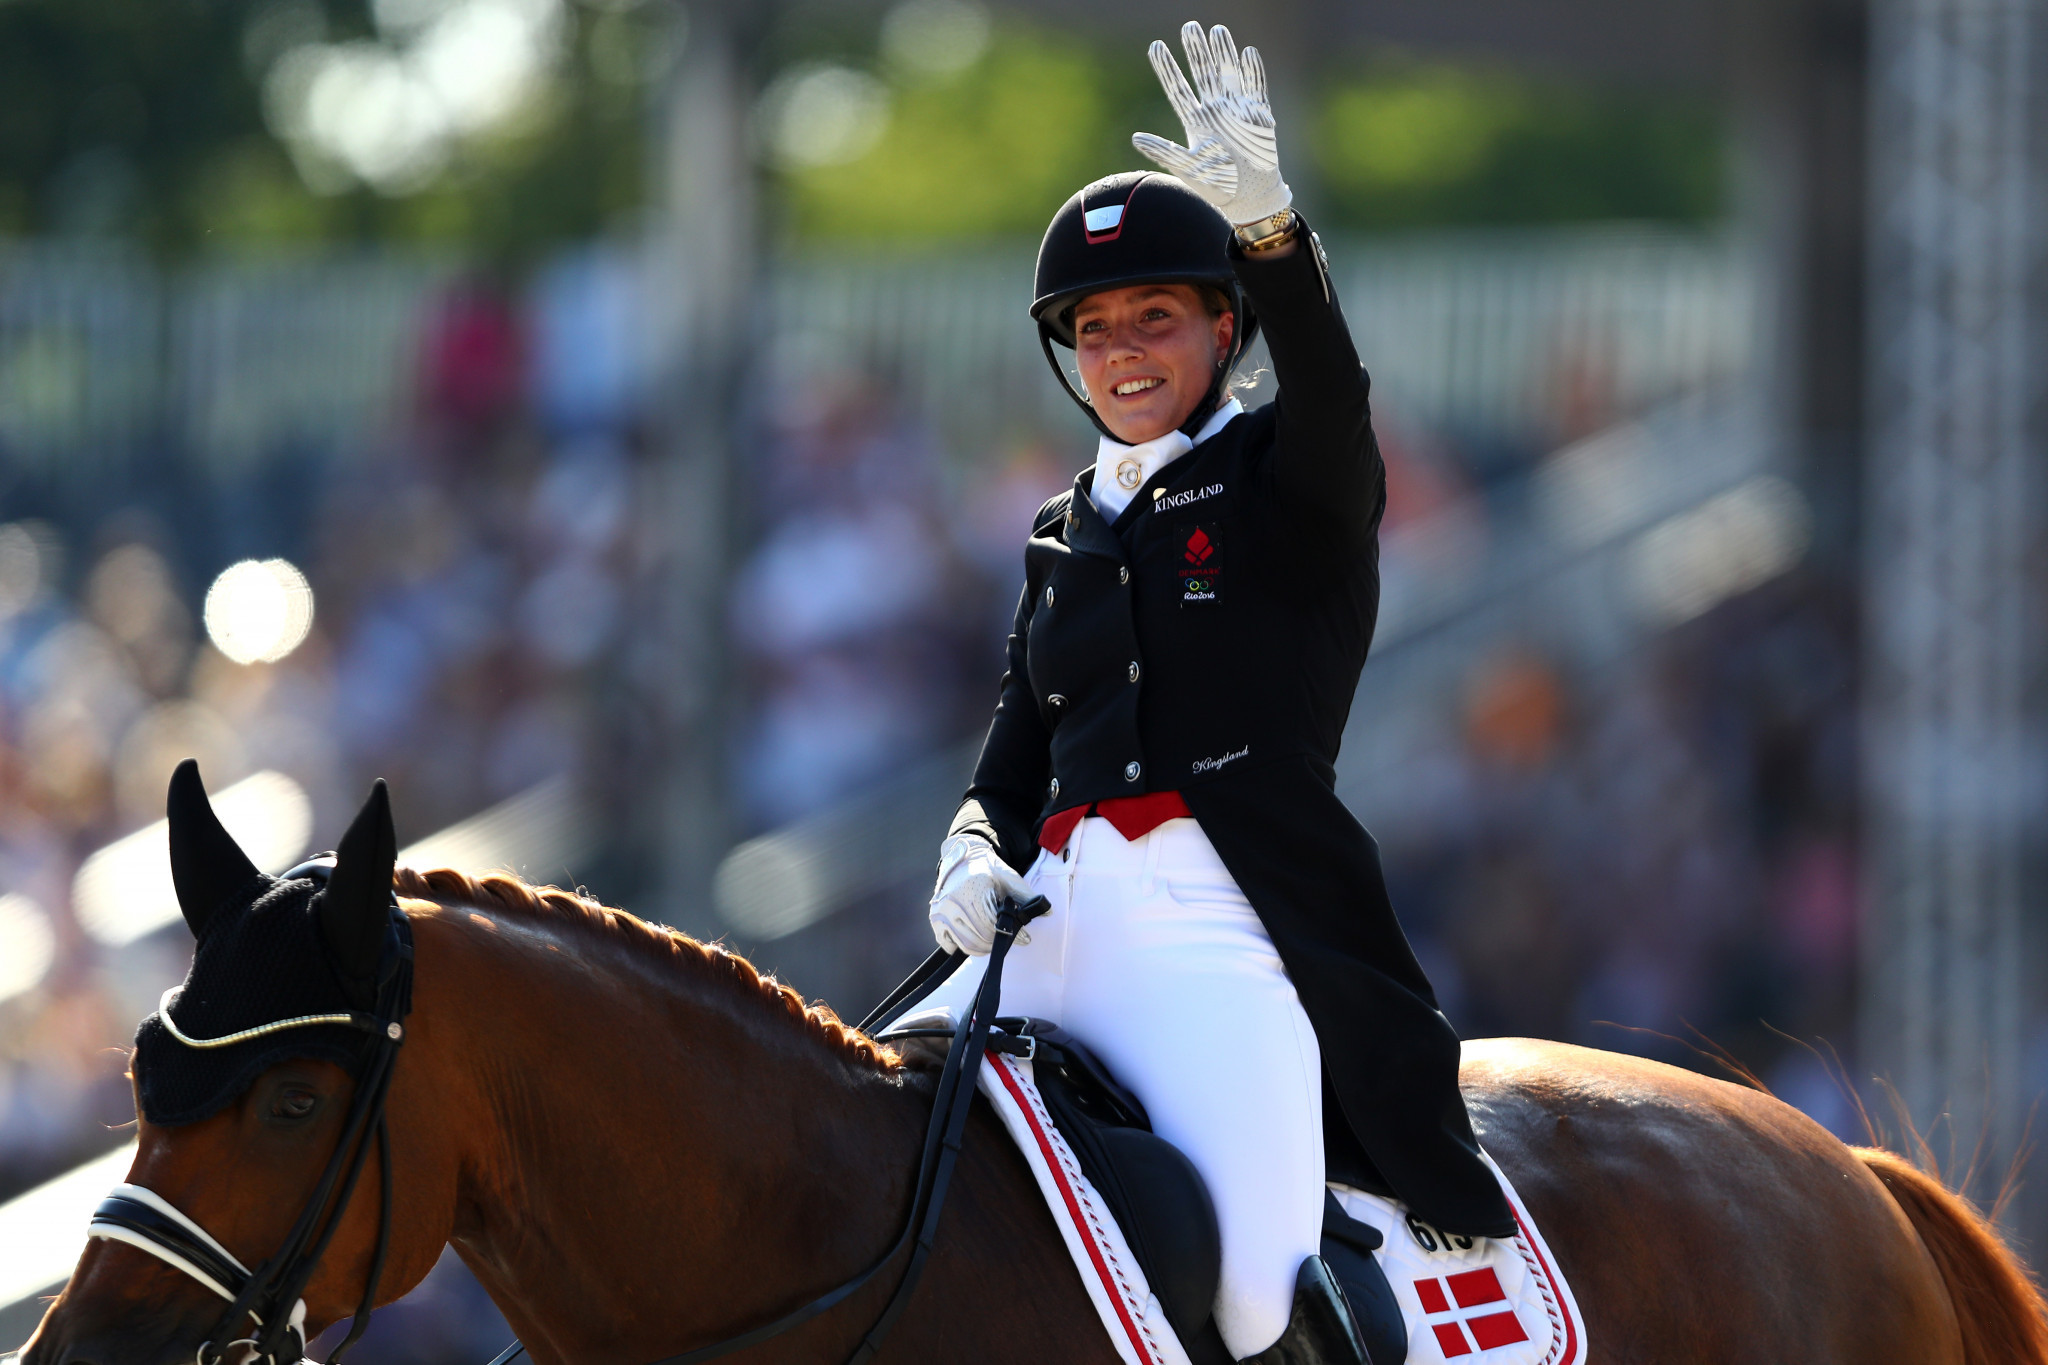 Dufour achieves personal best to win FEI Dressage World Cup in Gothenburg